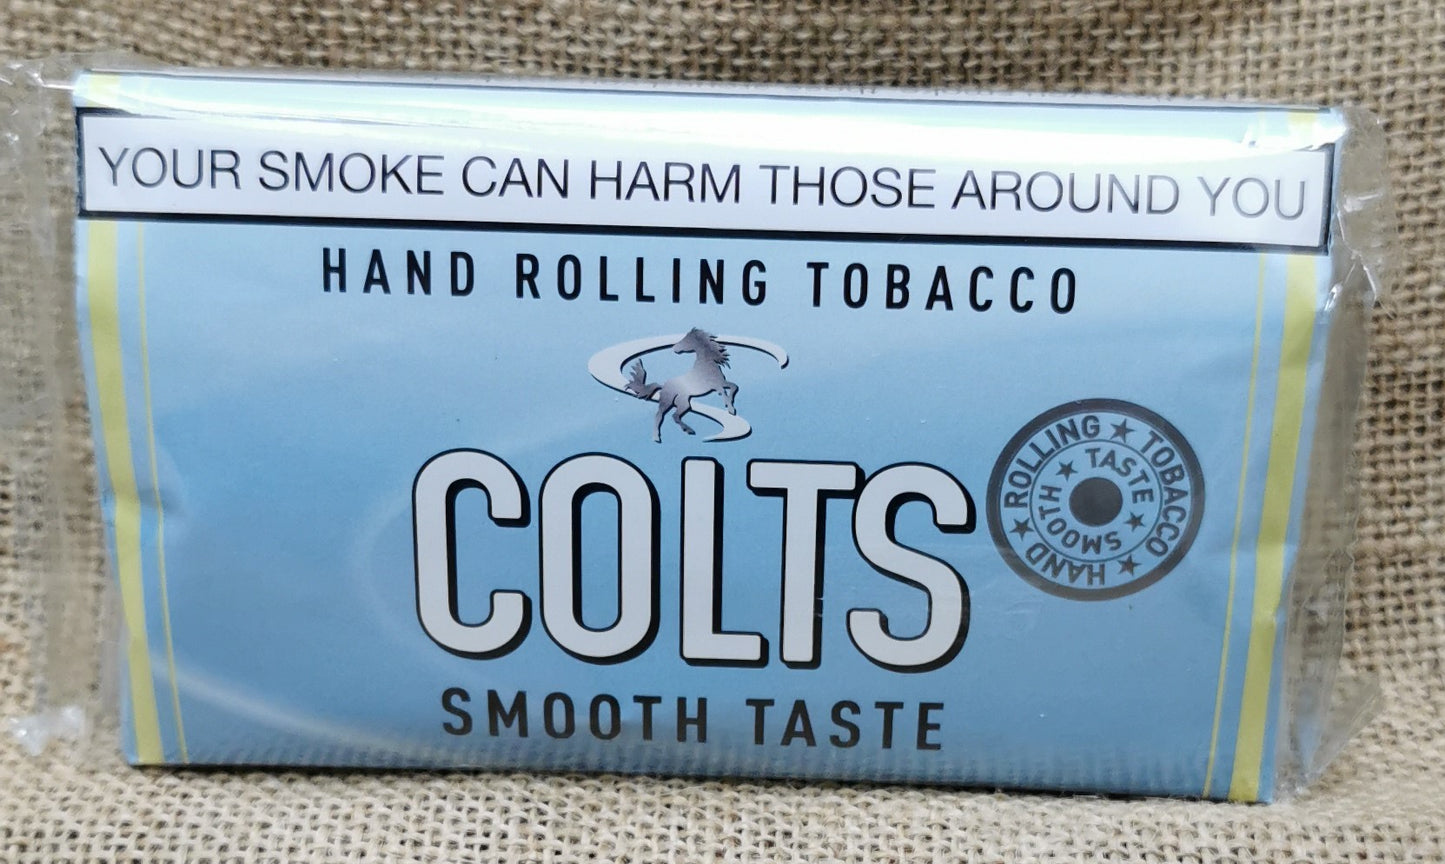 ROLLING TOBACCO PER PACKET